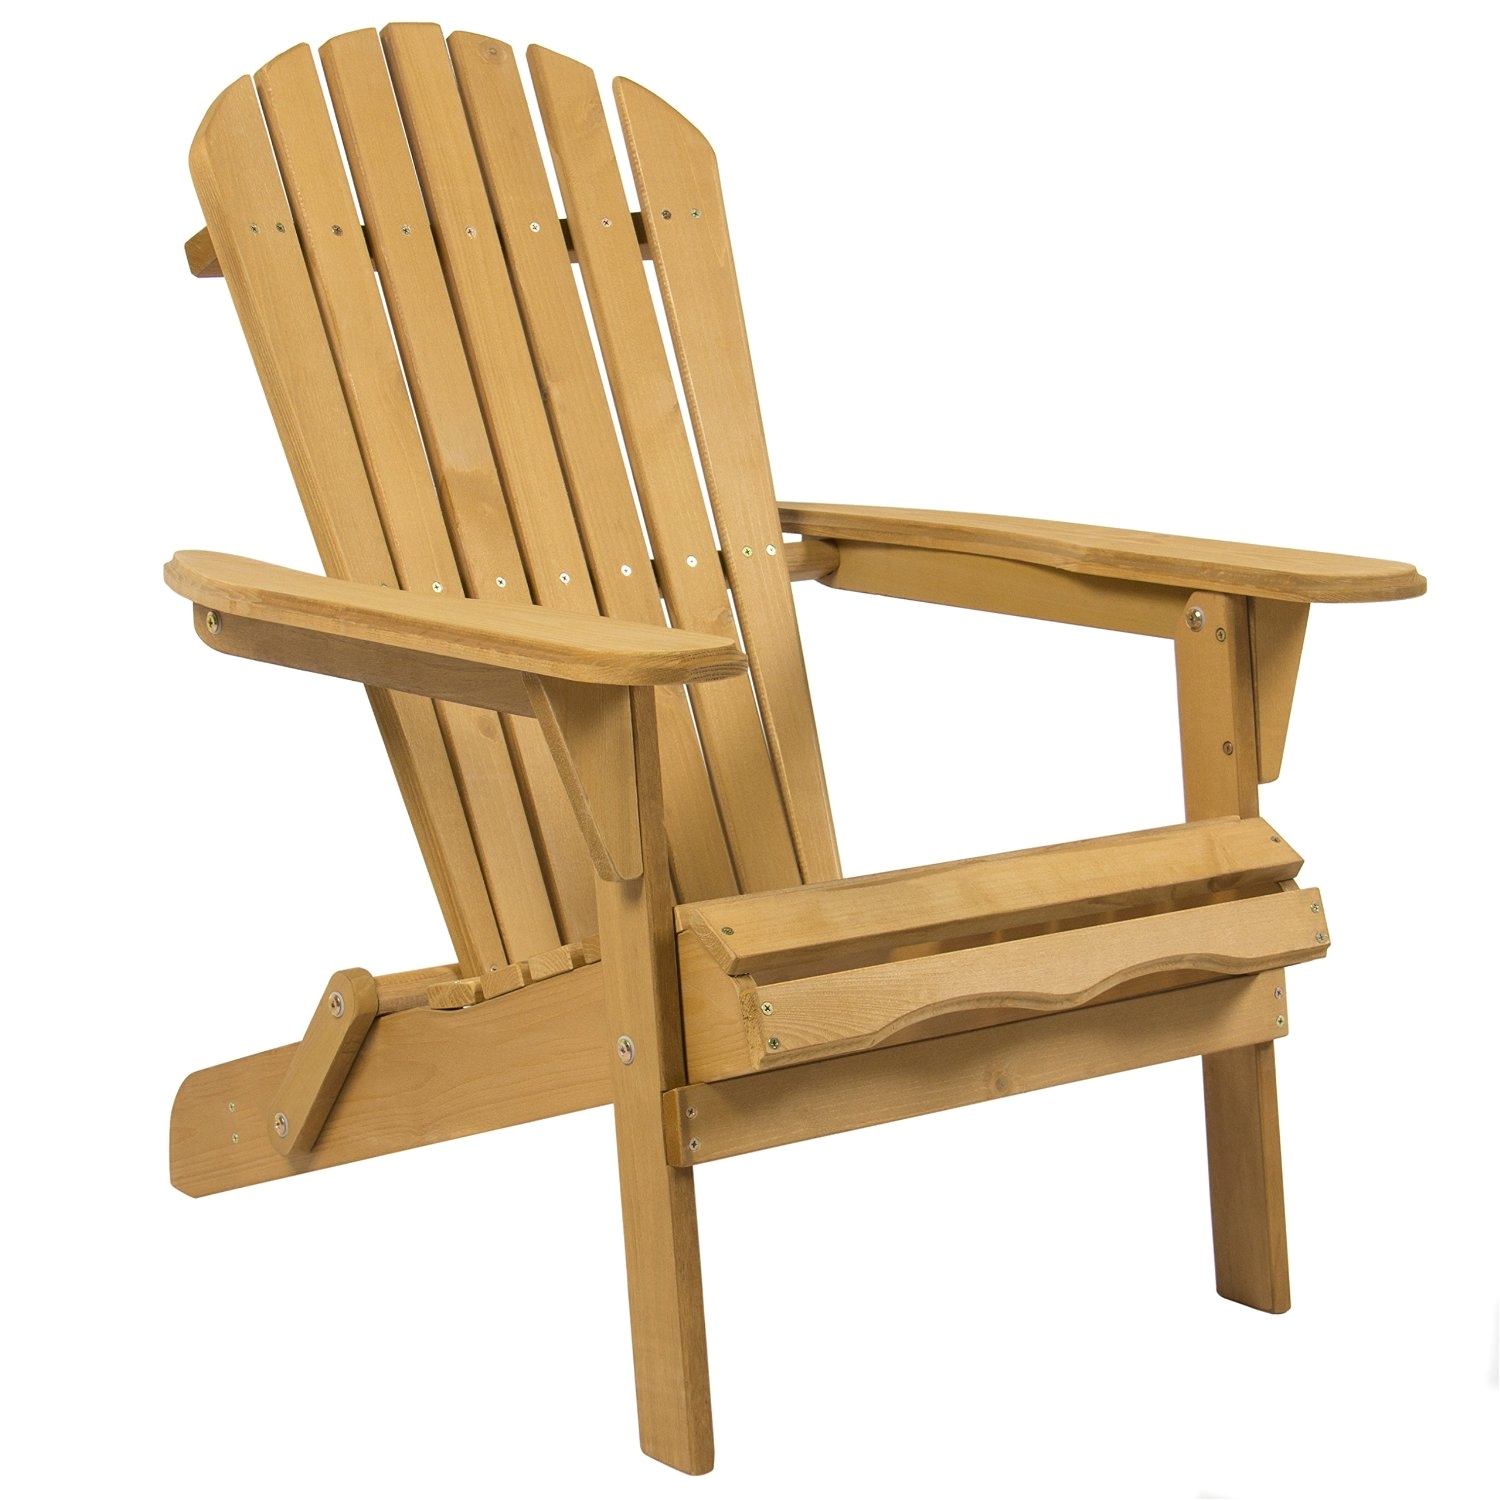 How to Build A Wooden Folding Chair Amazon Com Best Choice Products Foldable Wood Adirondack Chair for